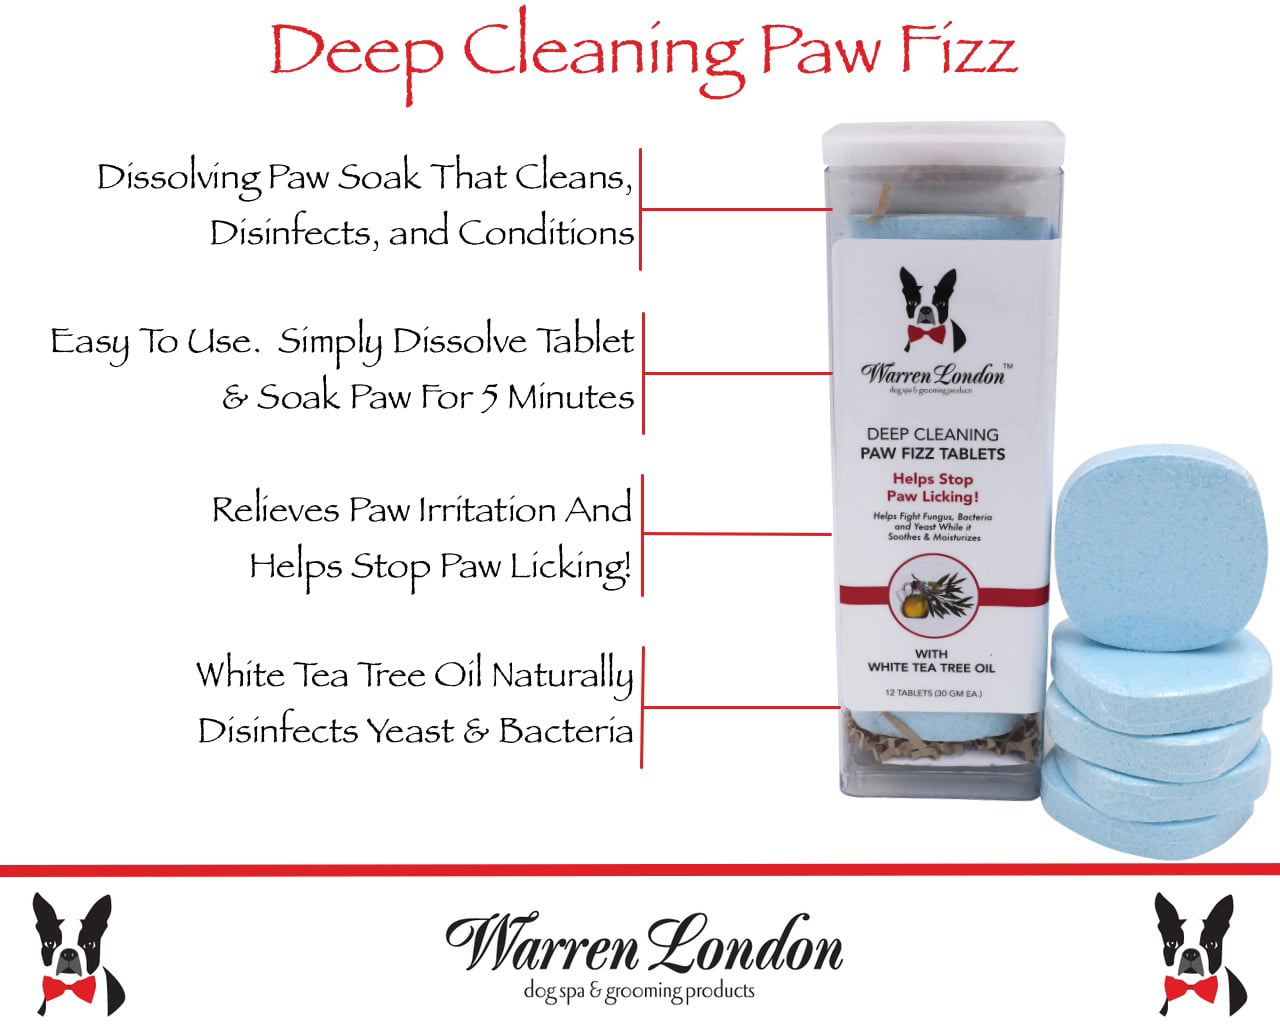 3 Sizes Warren London Deep Cleaning Paw Fizz Soothing soak to Relieve Irritation and Combat Paw Licking! 